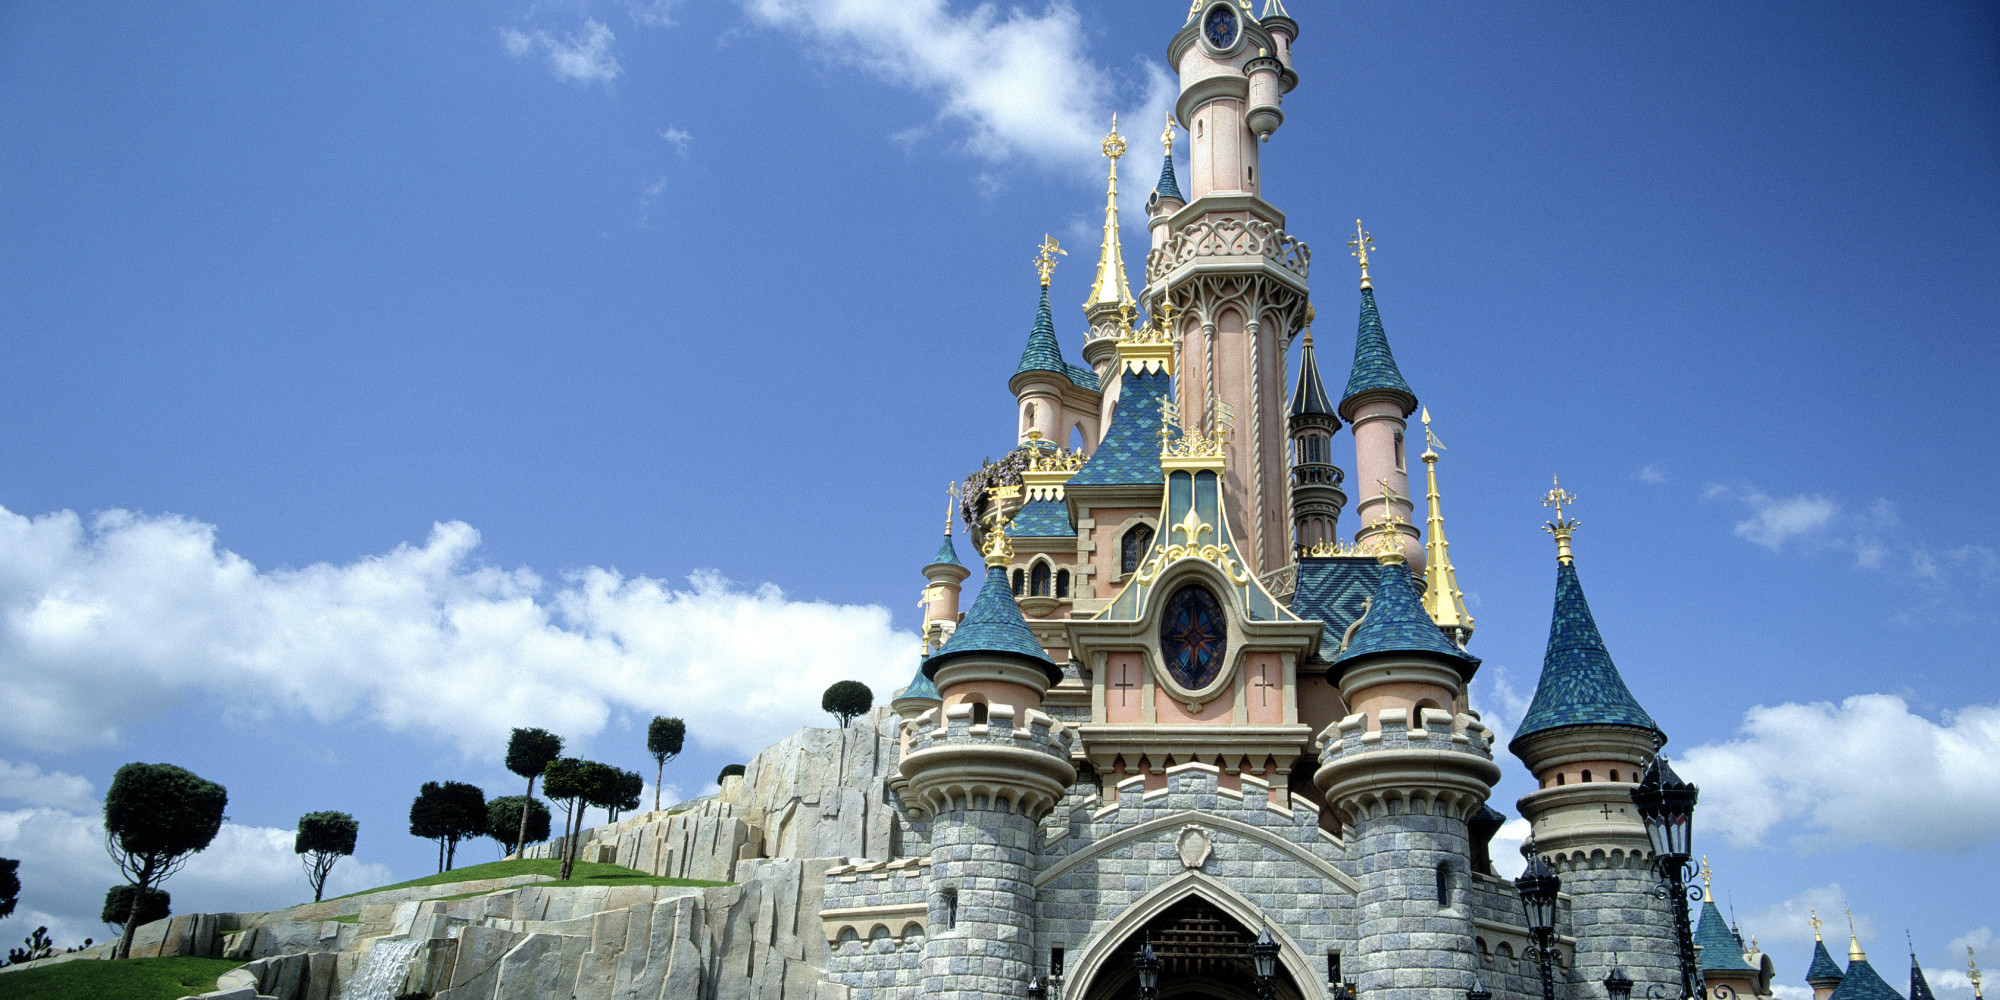 Here's How to Experience Disney World Without Buying Park Tickets